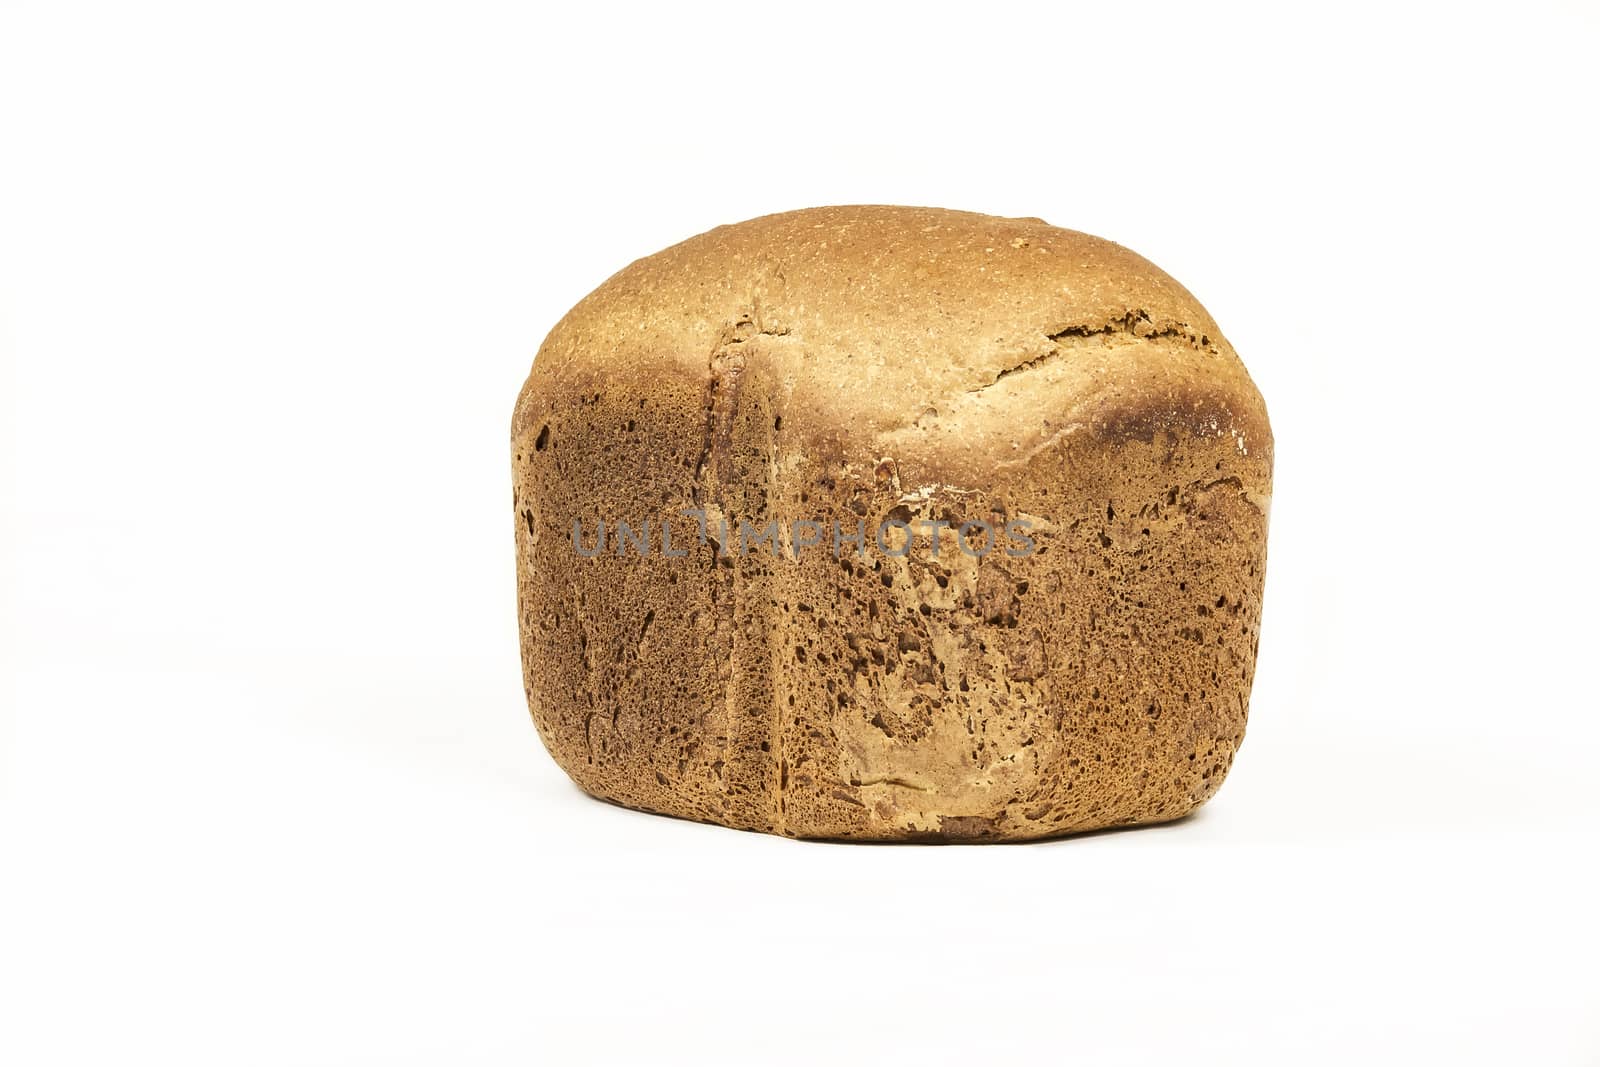 A loaf of fresh bread on a white background